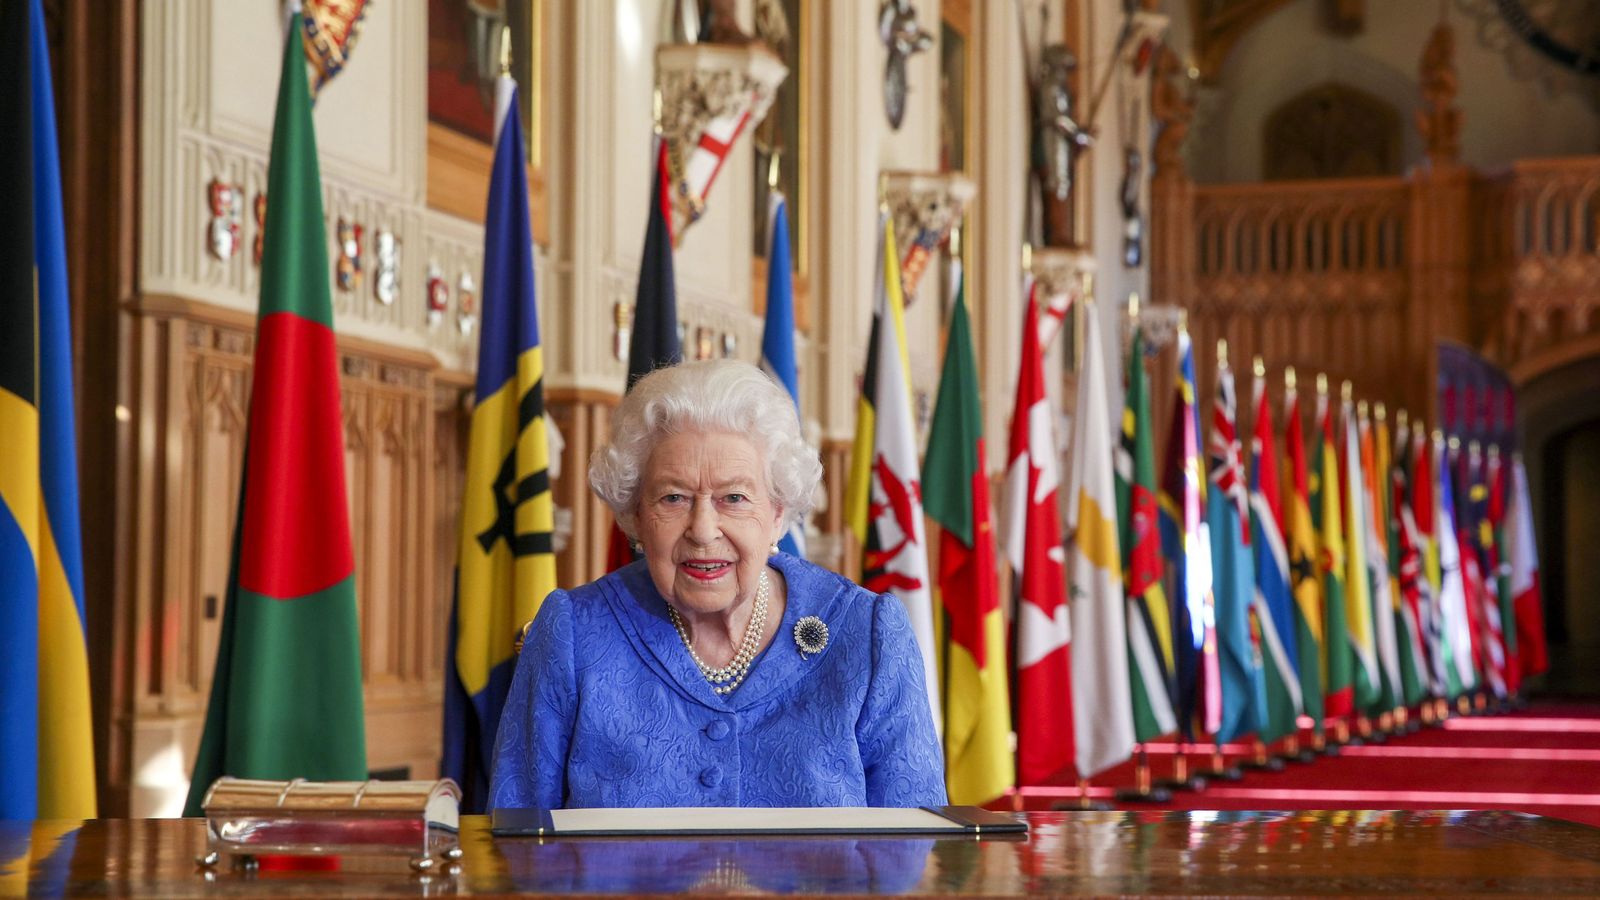 Queen hails 'friendship and unity' in Commonwealth address ahead of